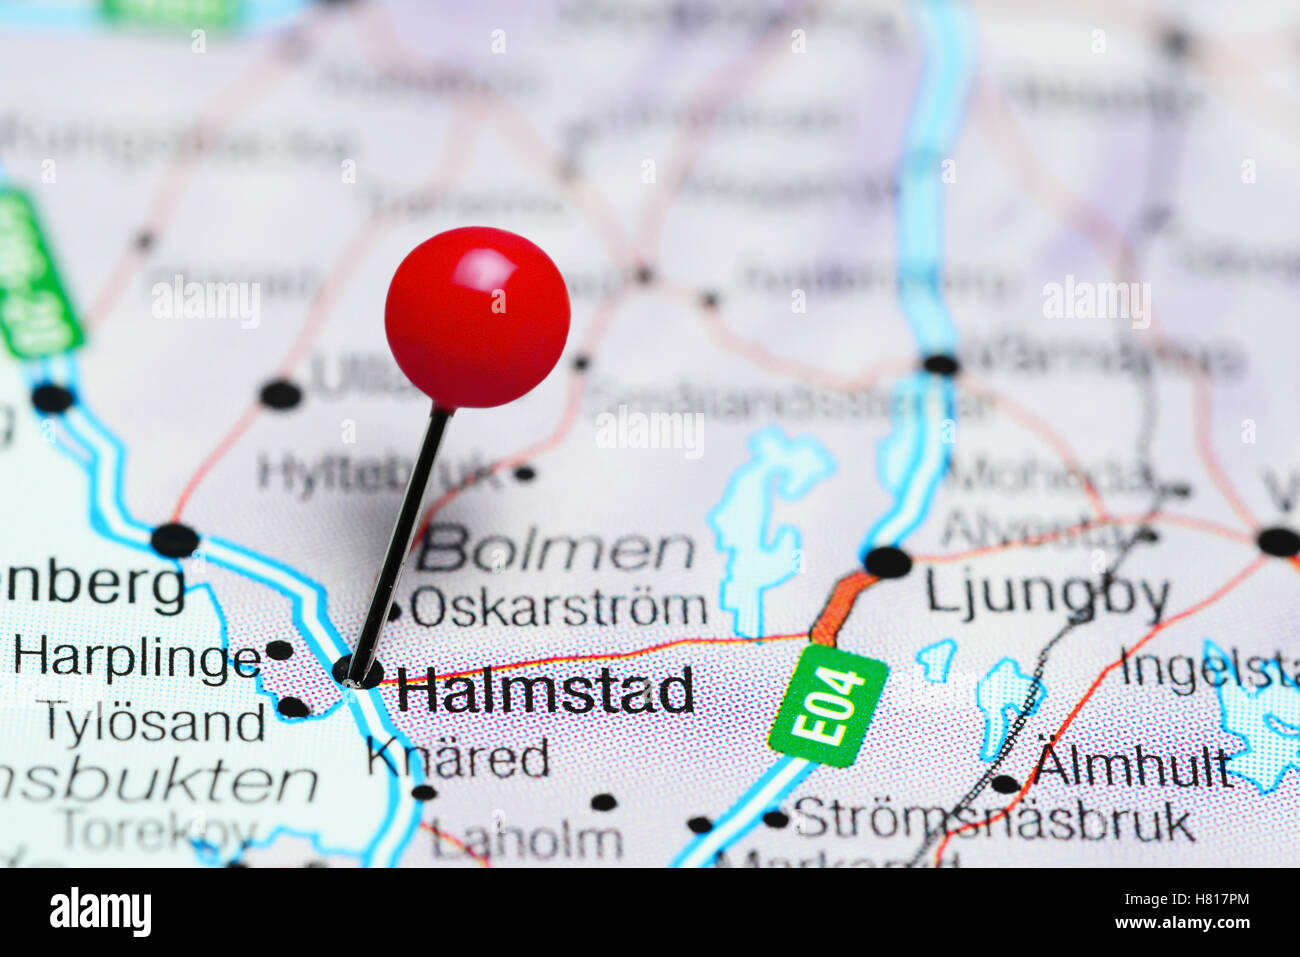 Halmstad pinned on a map of Sweden Stock Photo